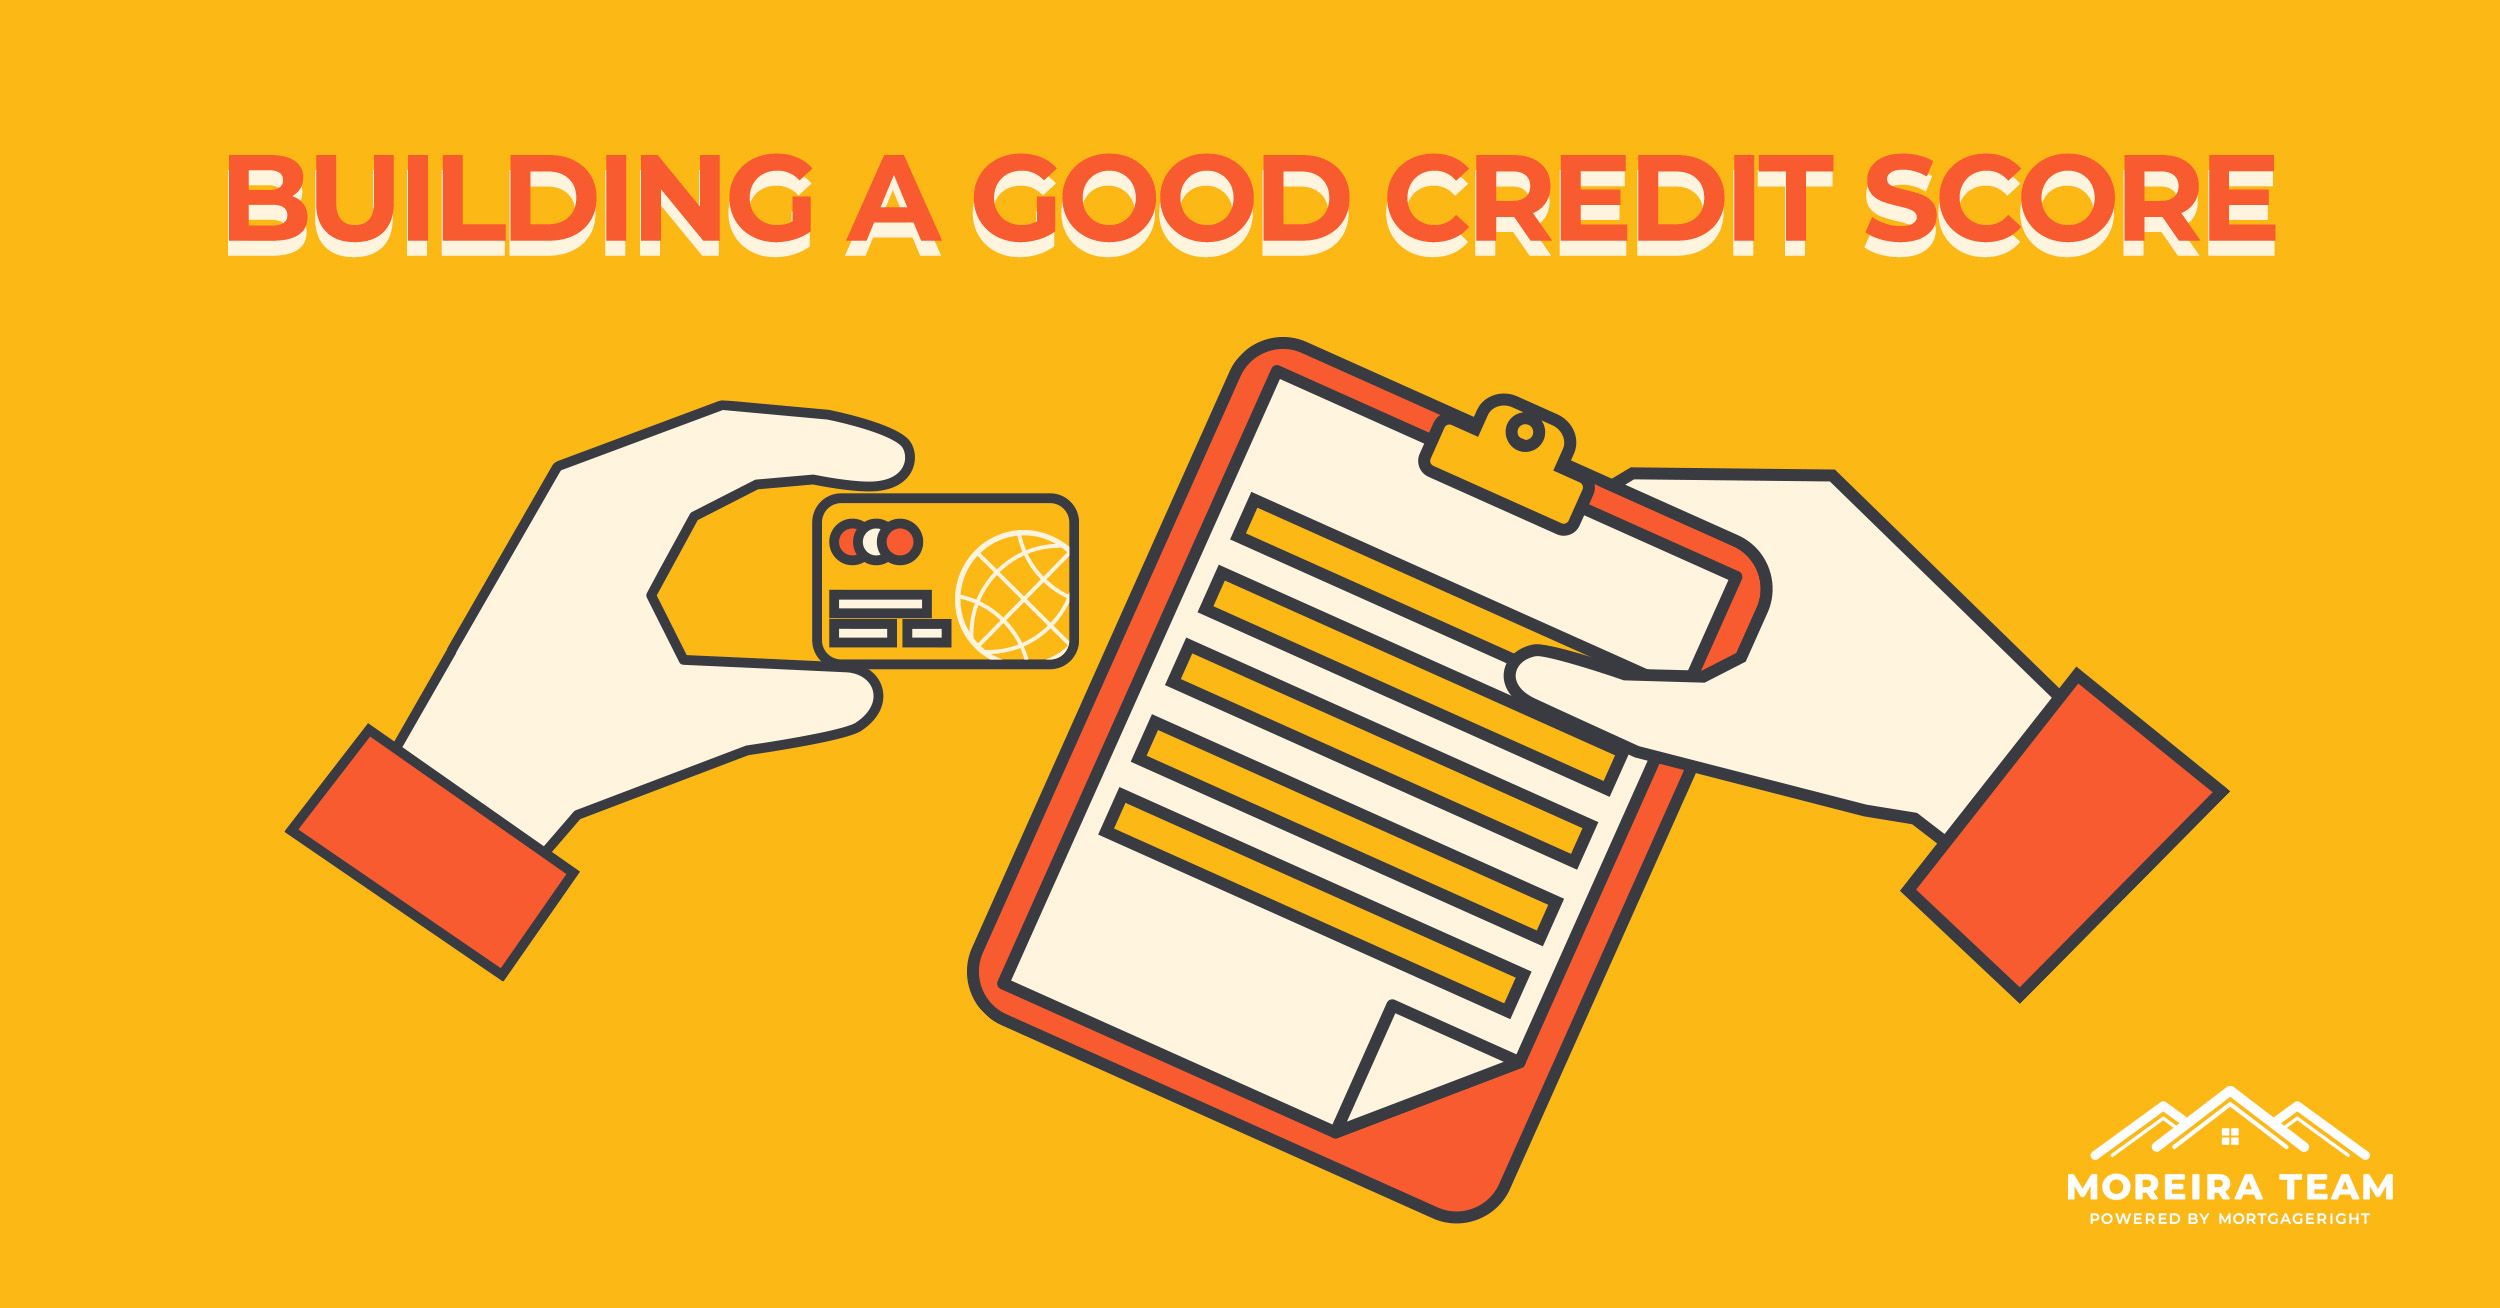 Building a Good Credit Score Starts with Monitoring Your Credit Report and Avoiding Unnecessary Credit Inquiries